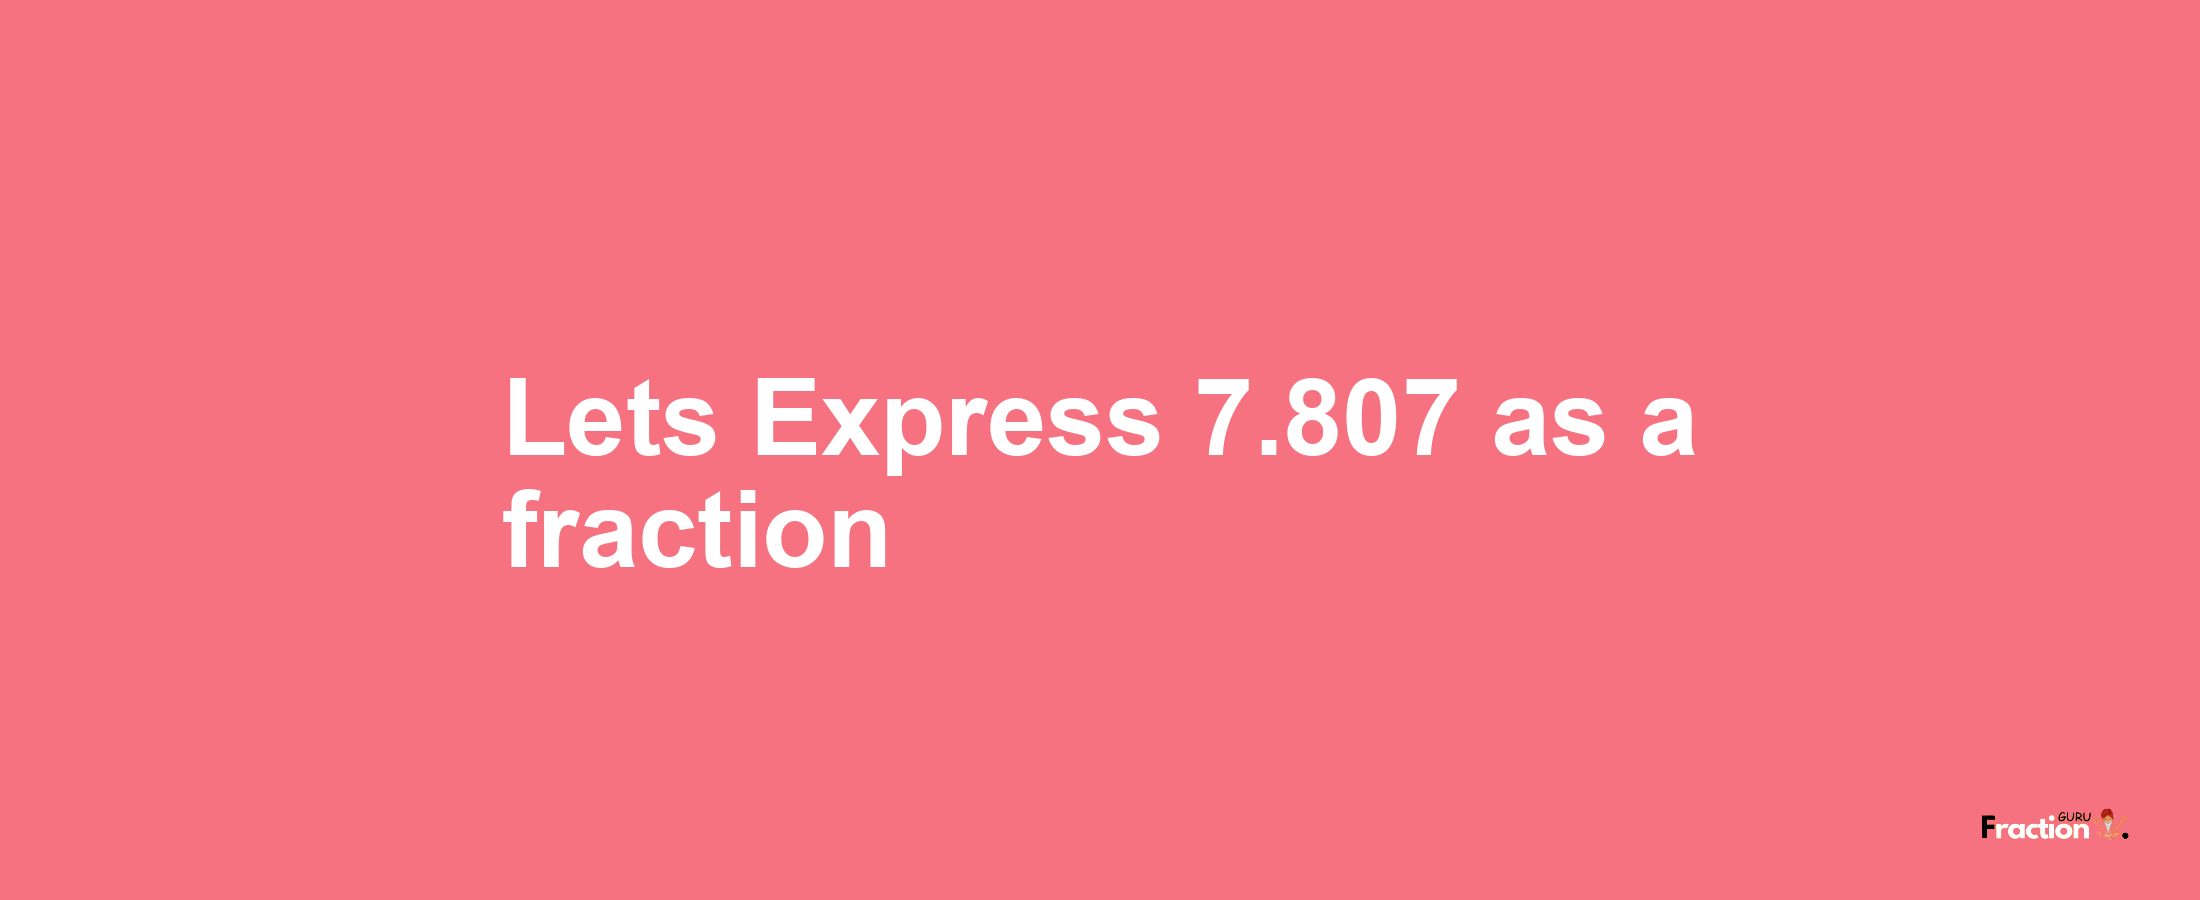 Lets Express 7.807 as afraction